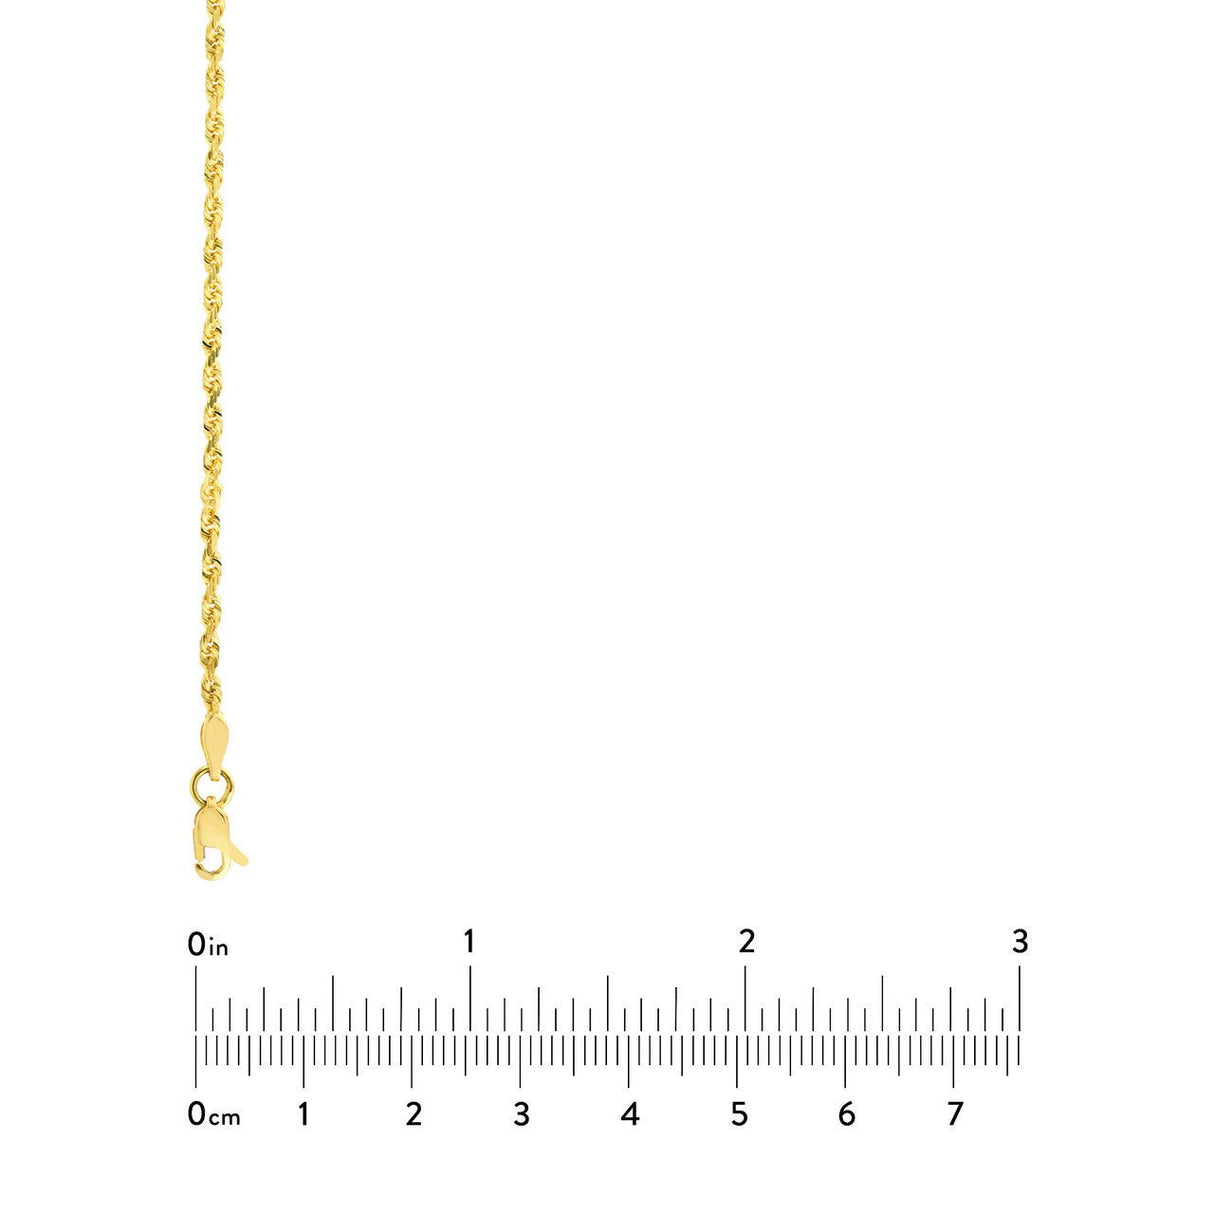 14K Gold Chain, 18", 2.15mm D/C Rope Chain with Lobster Lock, Gold Layered Chain, Gold Chain Necklace, - Diamond Origin